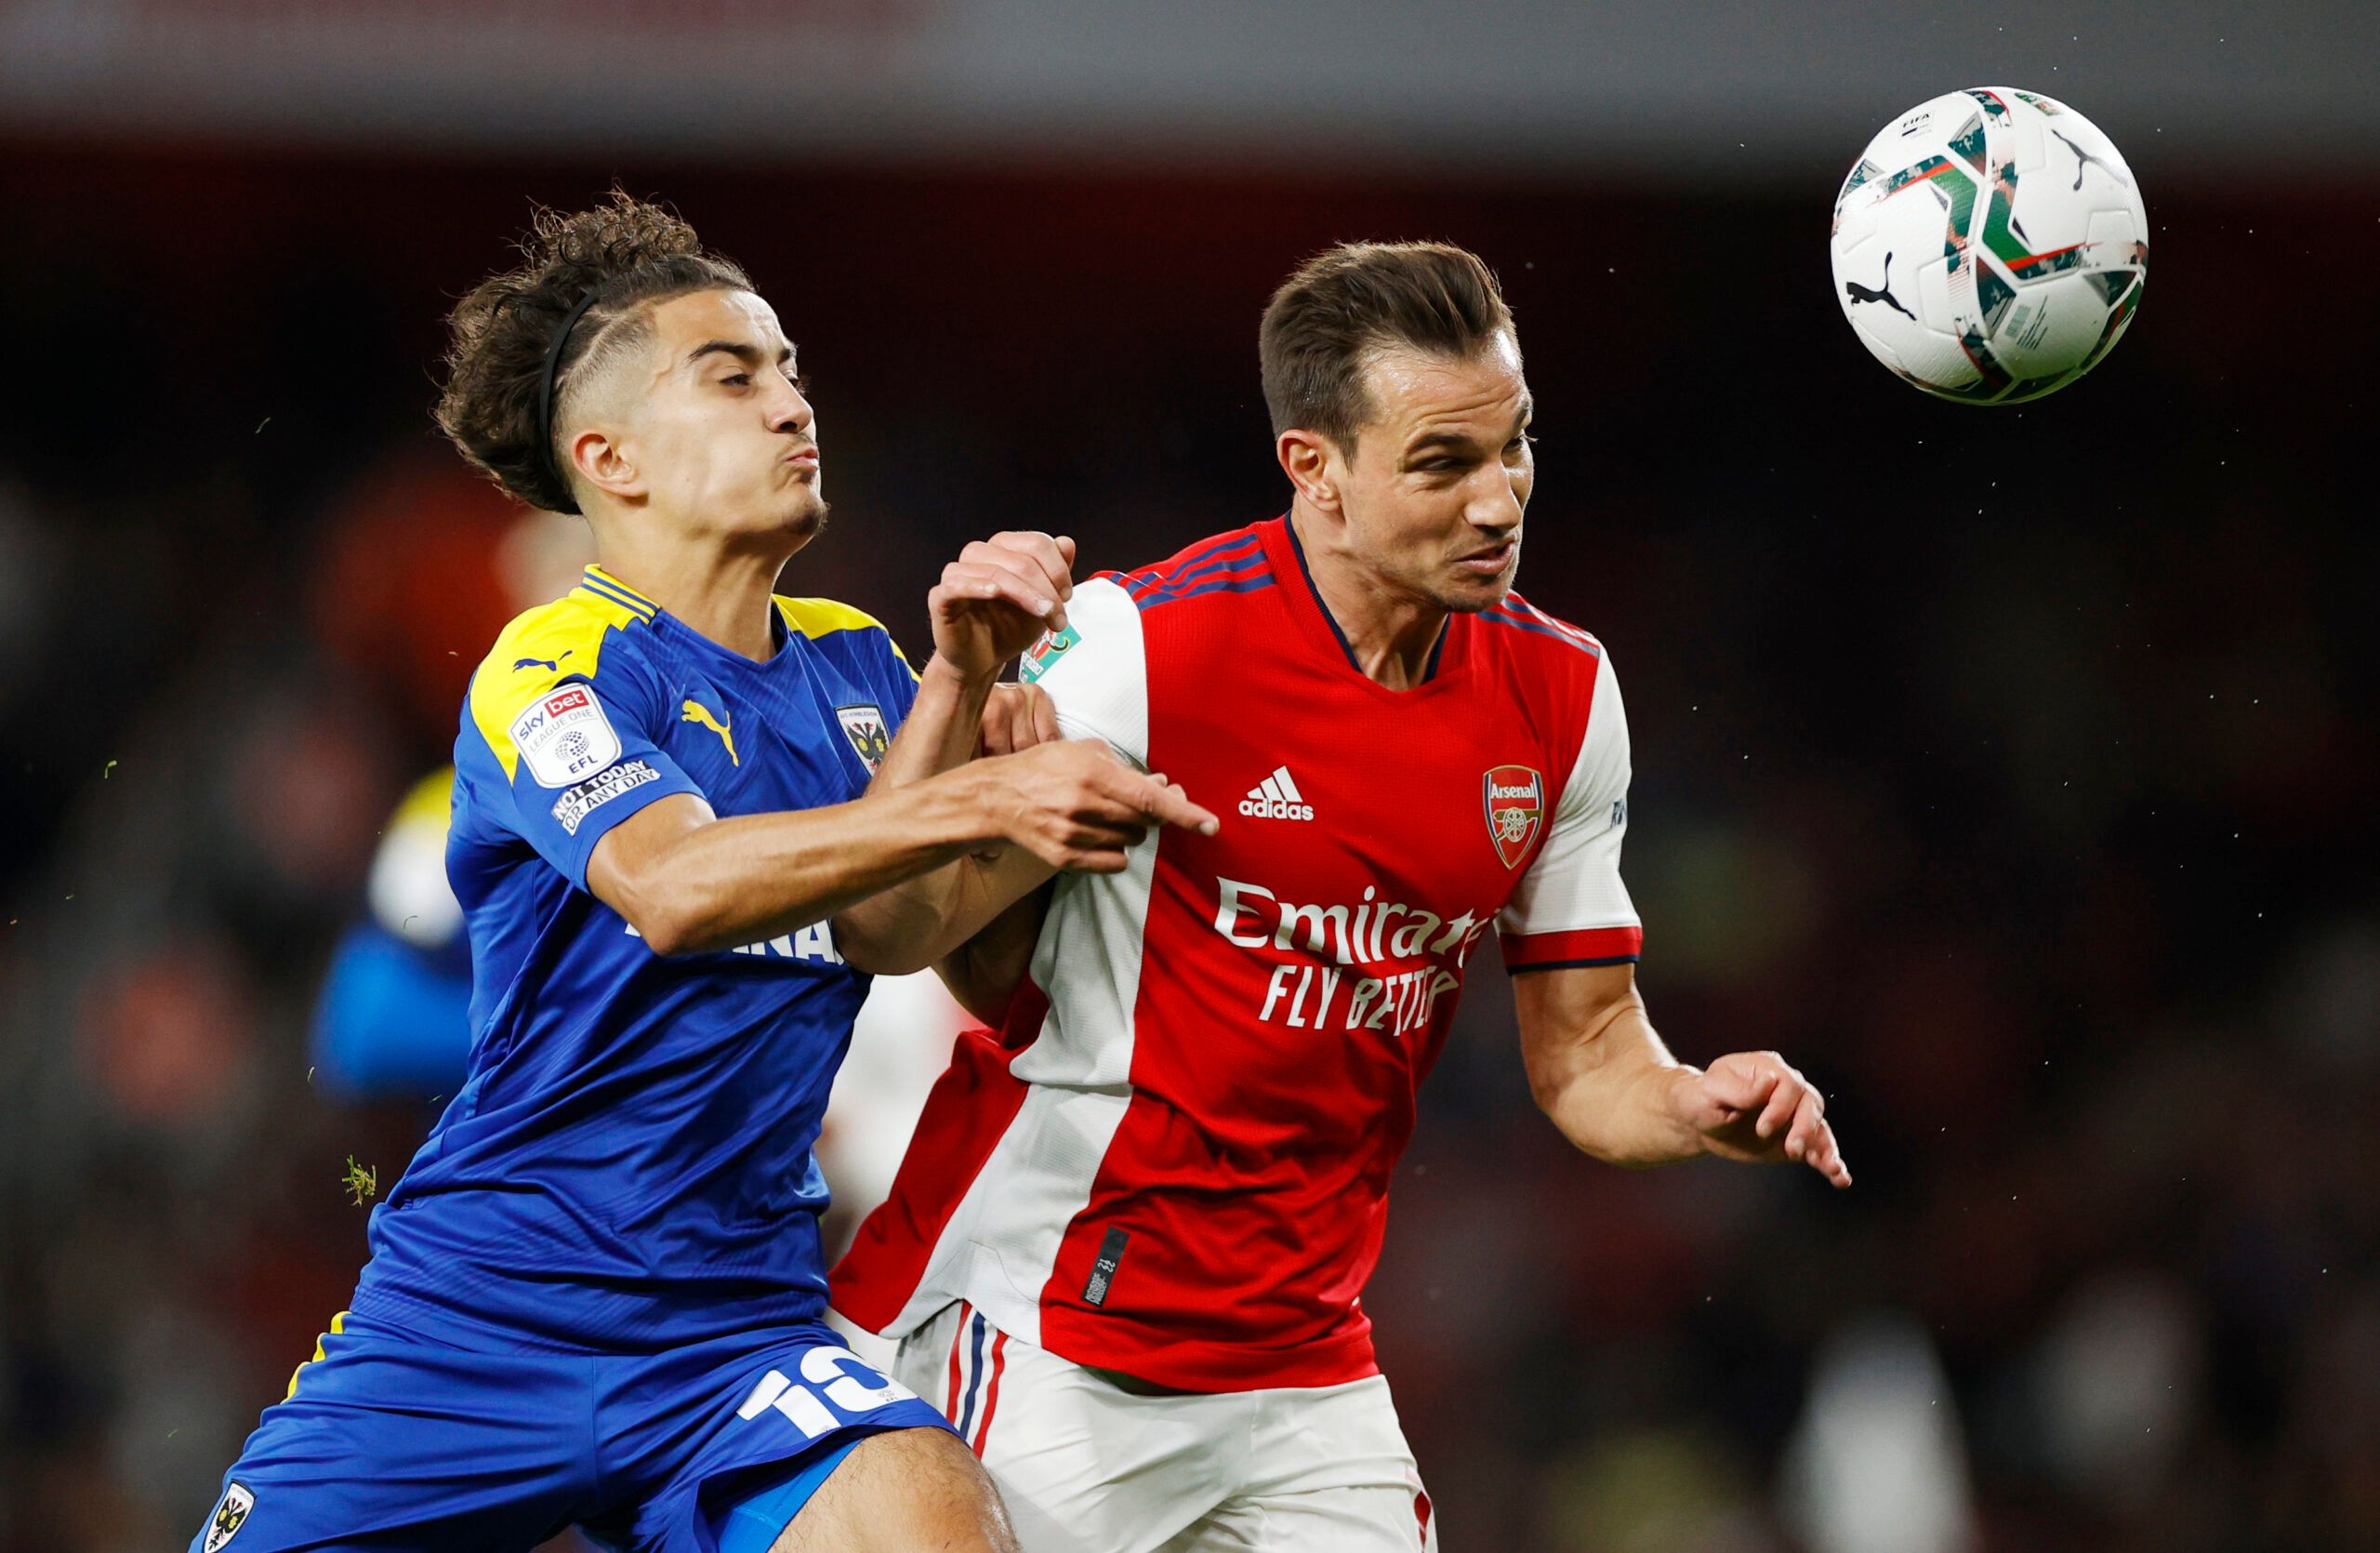 Soccer Football - Carabao Cup - Third Round - Arsenal v AFC Wimbledon - Emirates Stadium, London, Britain - September 22, 2021 AFC Wimbledon's Ayoub Assal in action with Arsenal's Cedric Soares Action Images via Reuters/John Sibley EDITORIAL USE ONLY. No use with unauthorized audio, video, data, fixture lists, club/league logos or 'live' services. Online in-match use limited to 75 images, no video emulation. No use in betting, games or single club /league/player publications.  Please contact you